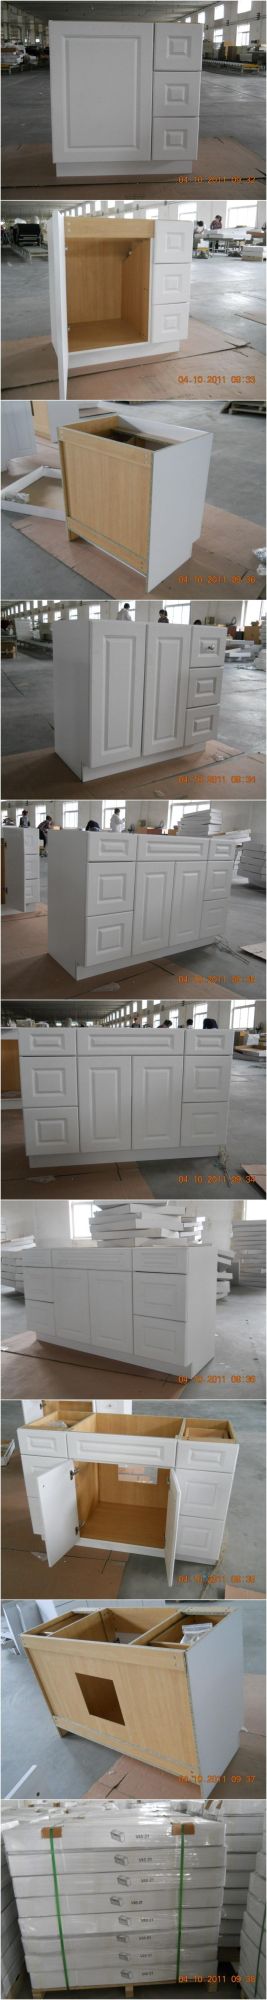 China Products/Suppliers. Modern Style Wood Home Furniture Hardware High Gloss Lacquer Kitchen Cabinets